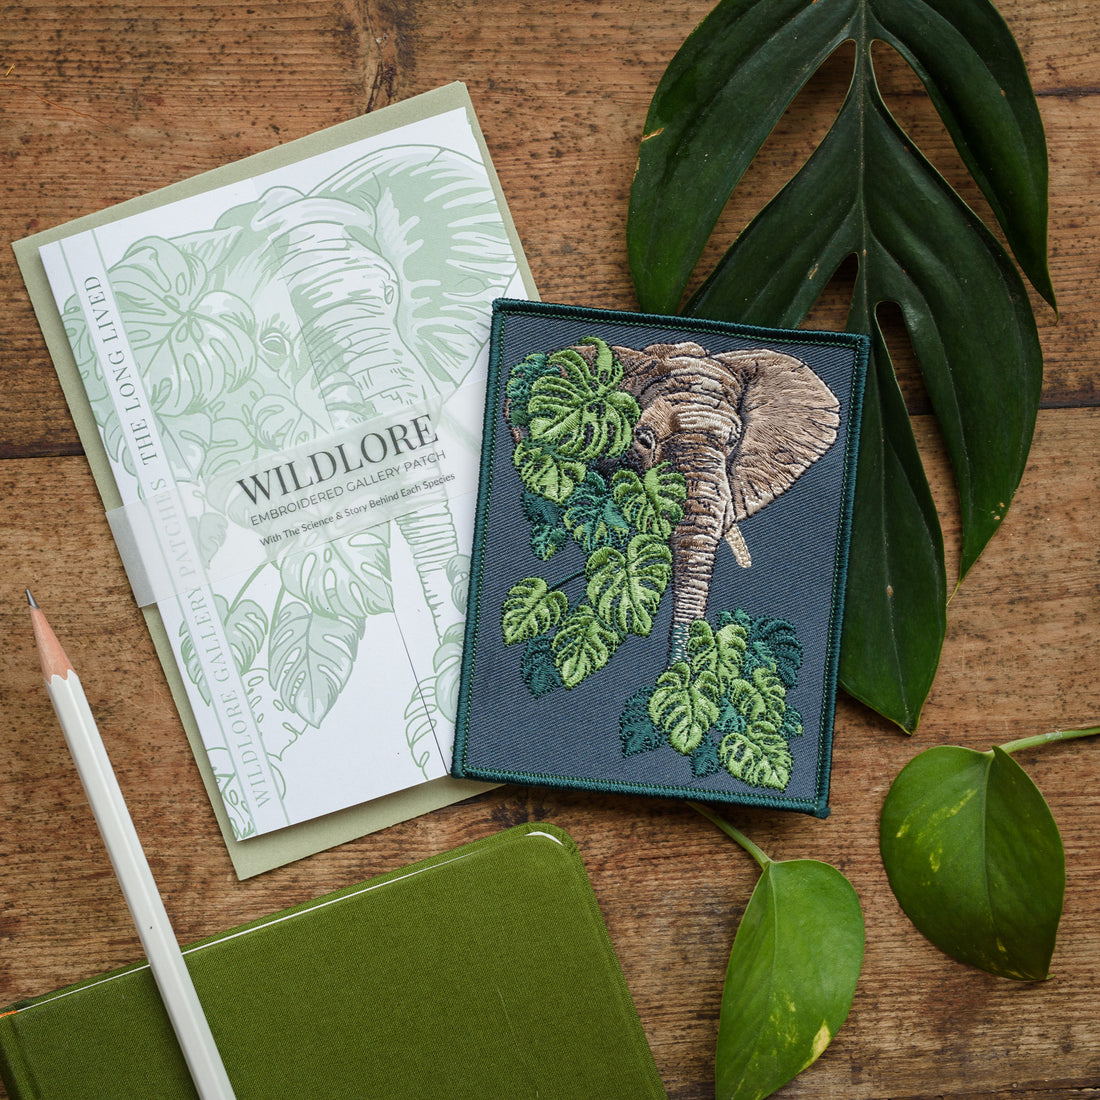 Elephant and Monstera Leaf Embroidered Patch in gatefold card with science and story behind the species